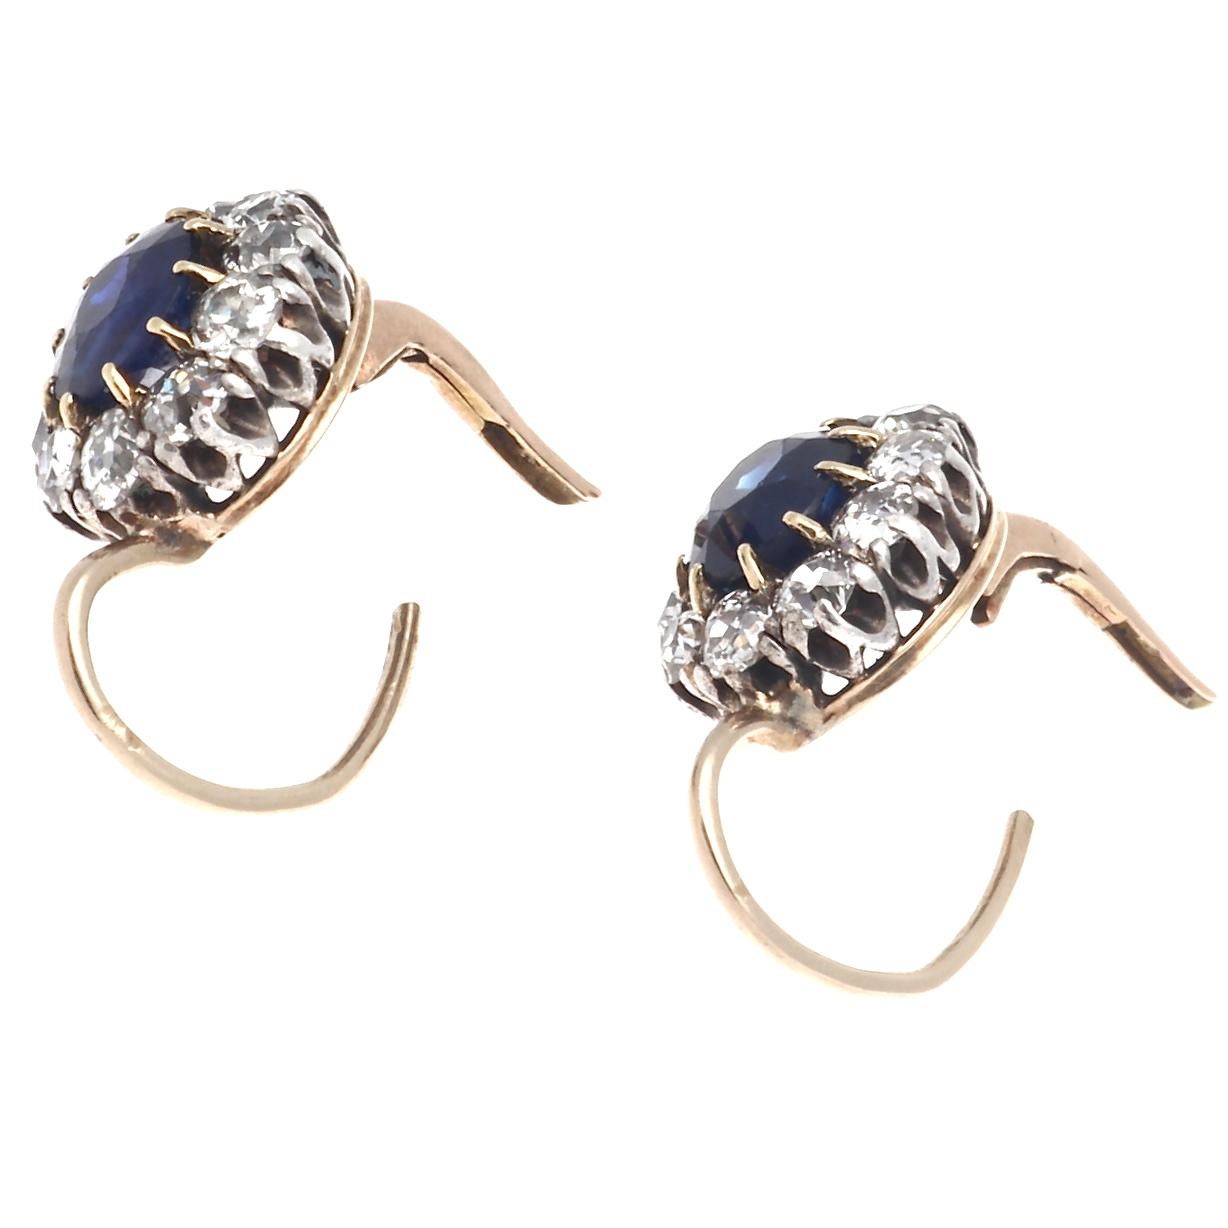 Beautiful authentic Victorian sapphire diamond leverback earrings. Featuring GIA certified no heat faceted oval sapphires weighing 1.30 carats each. The vivid sapphires are surrounded by a cluster of 20 old European cut diamonds that weigh